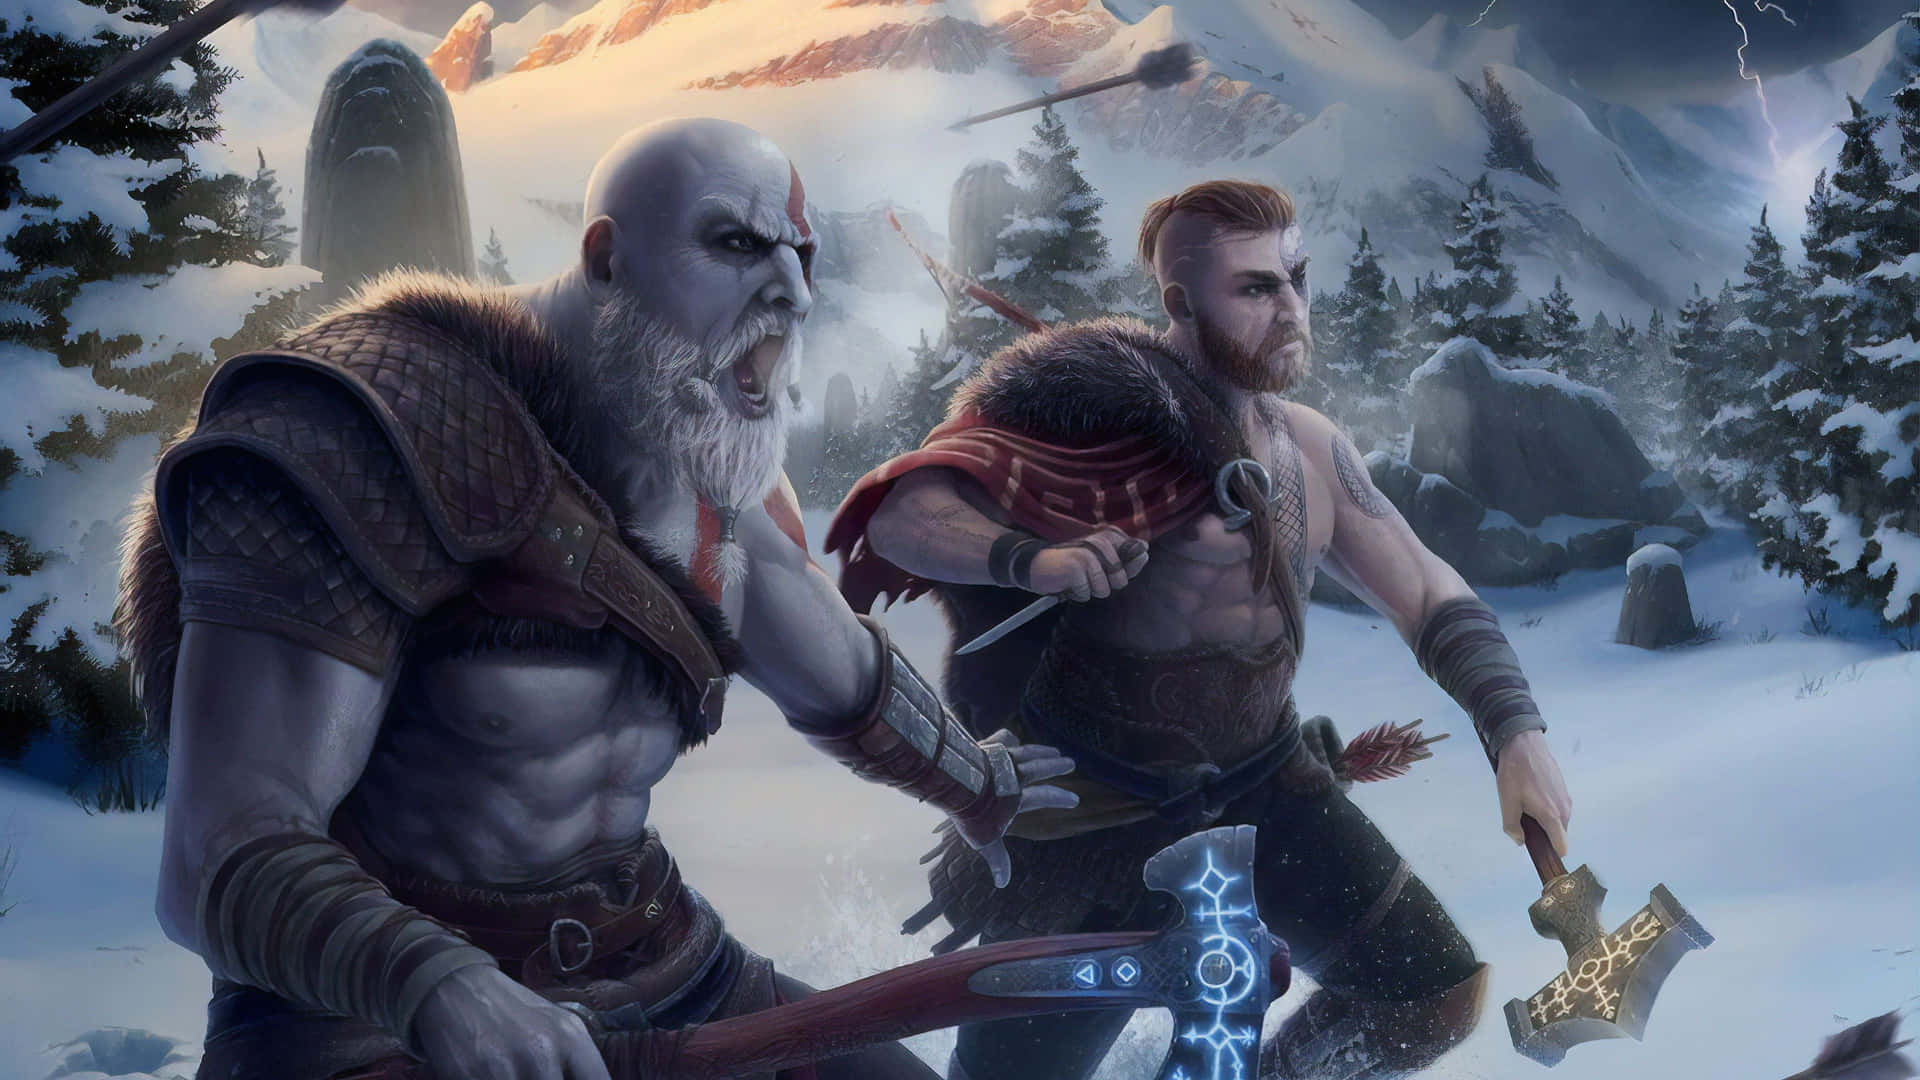 The Mighty God of War Characters in Action Wallpaper